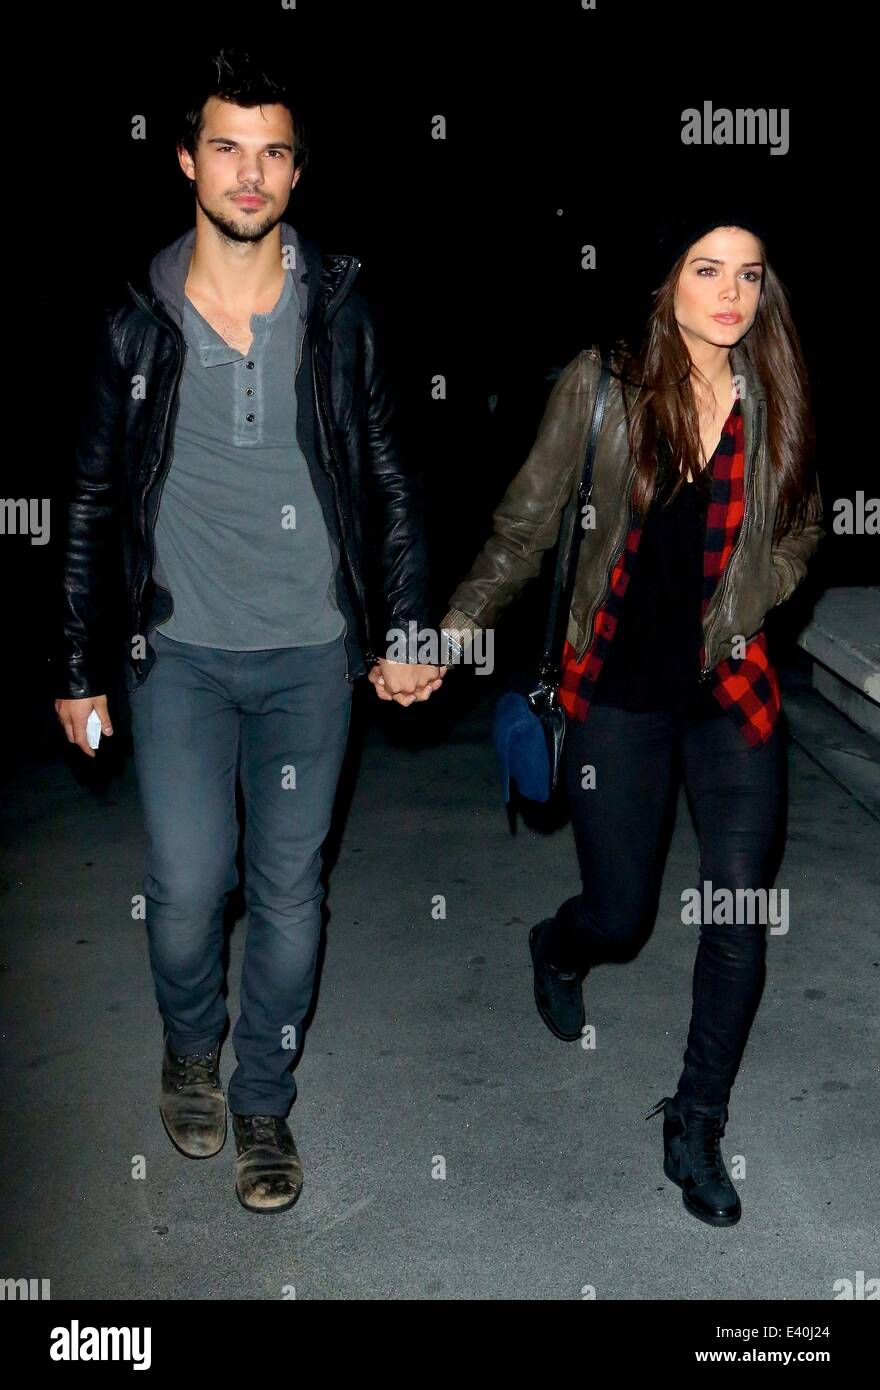 taylor lautner and marie avgeropoulos holding hands